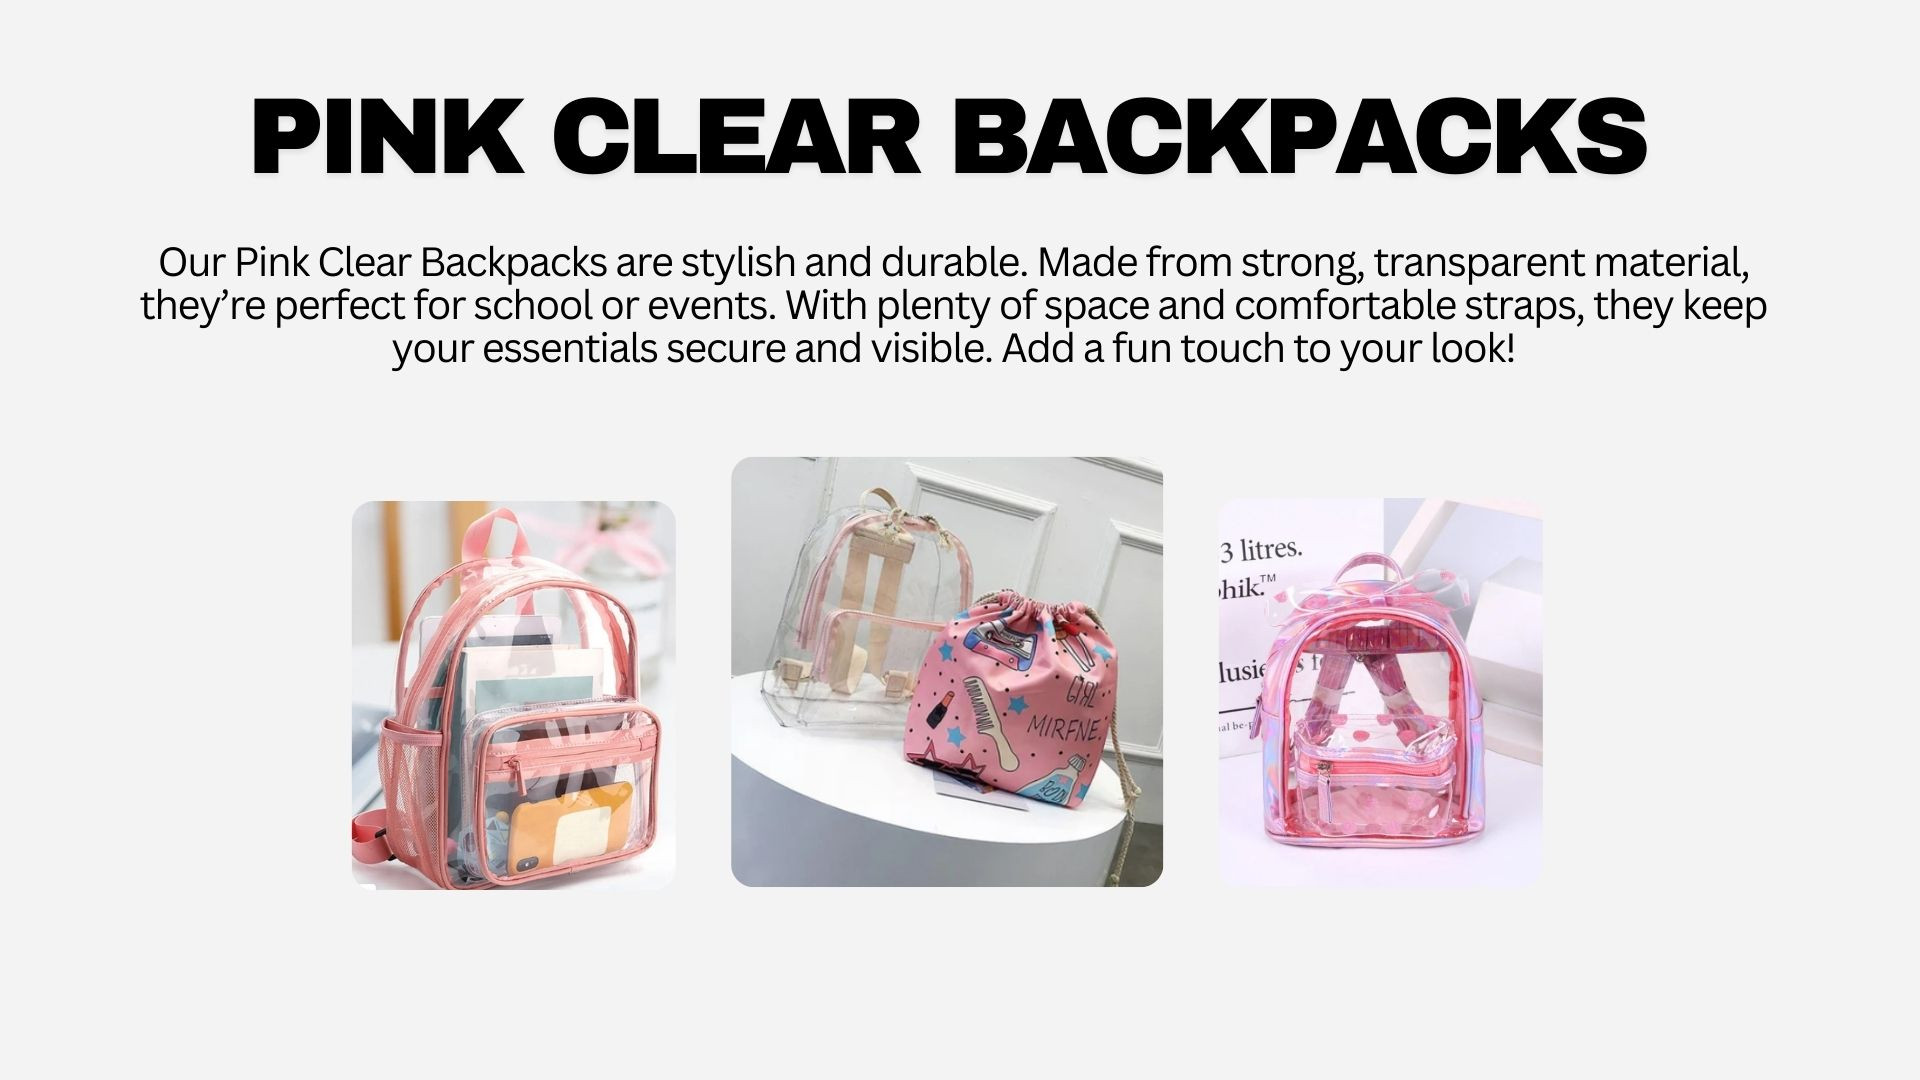 Trendy TransparencyClear Moda Pink Clear Backpacks for Style and Security - Gifyu